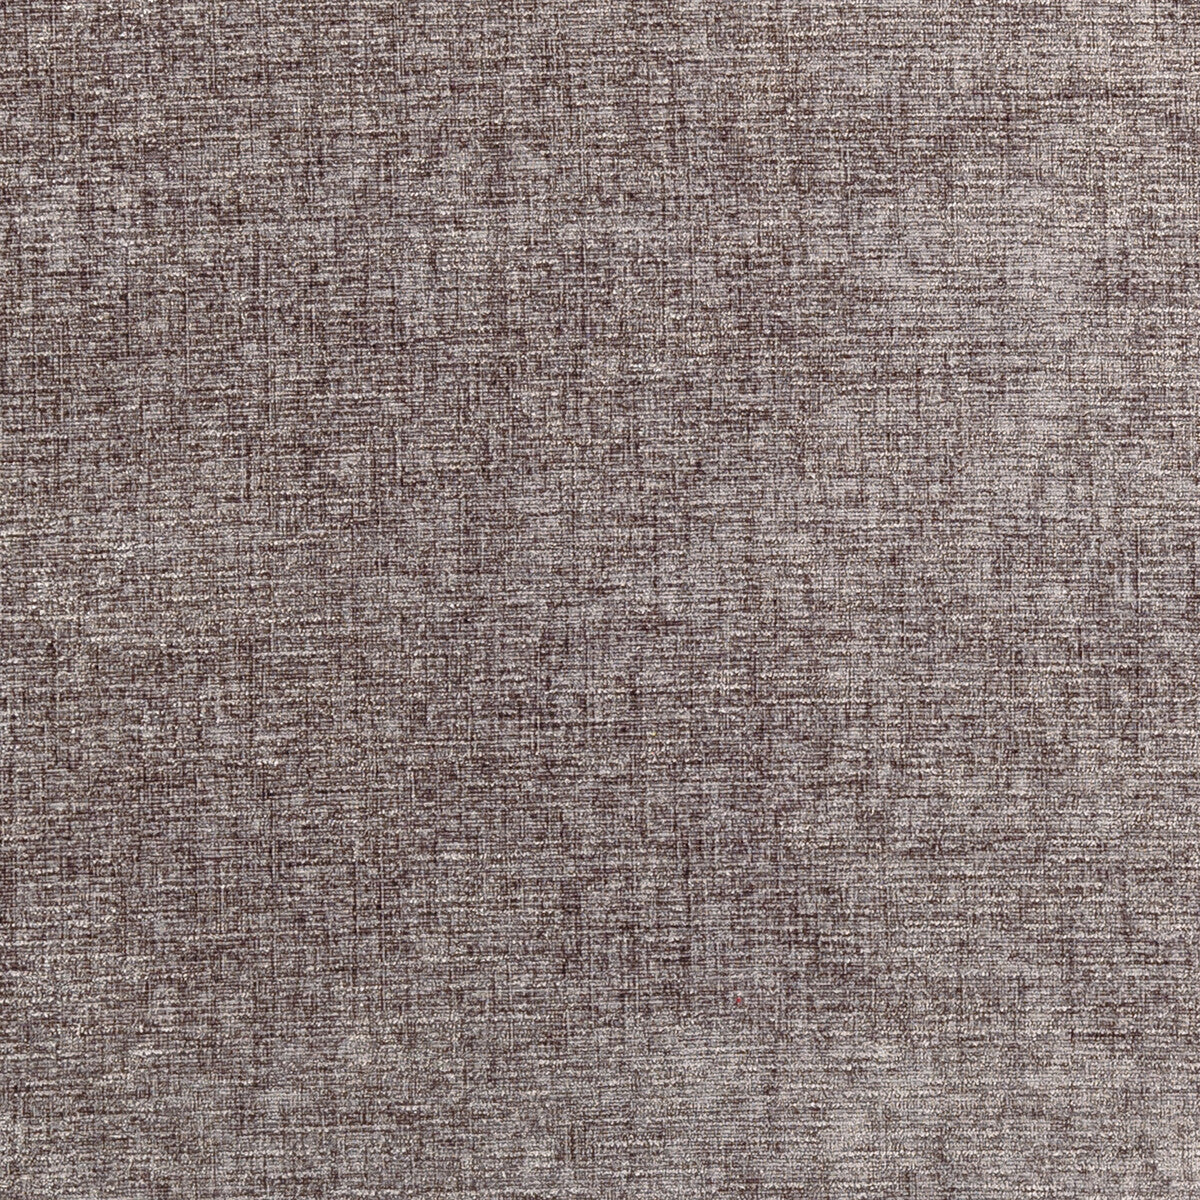 Karina fabric in steel color - pattern F0371/29.CAC.0 - by Clarke And Clarke in the Clarke &amp; Clarke Karina collection